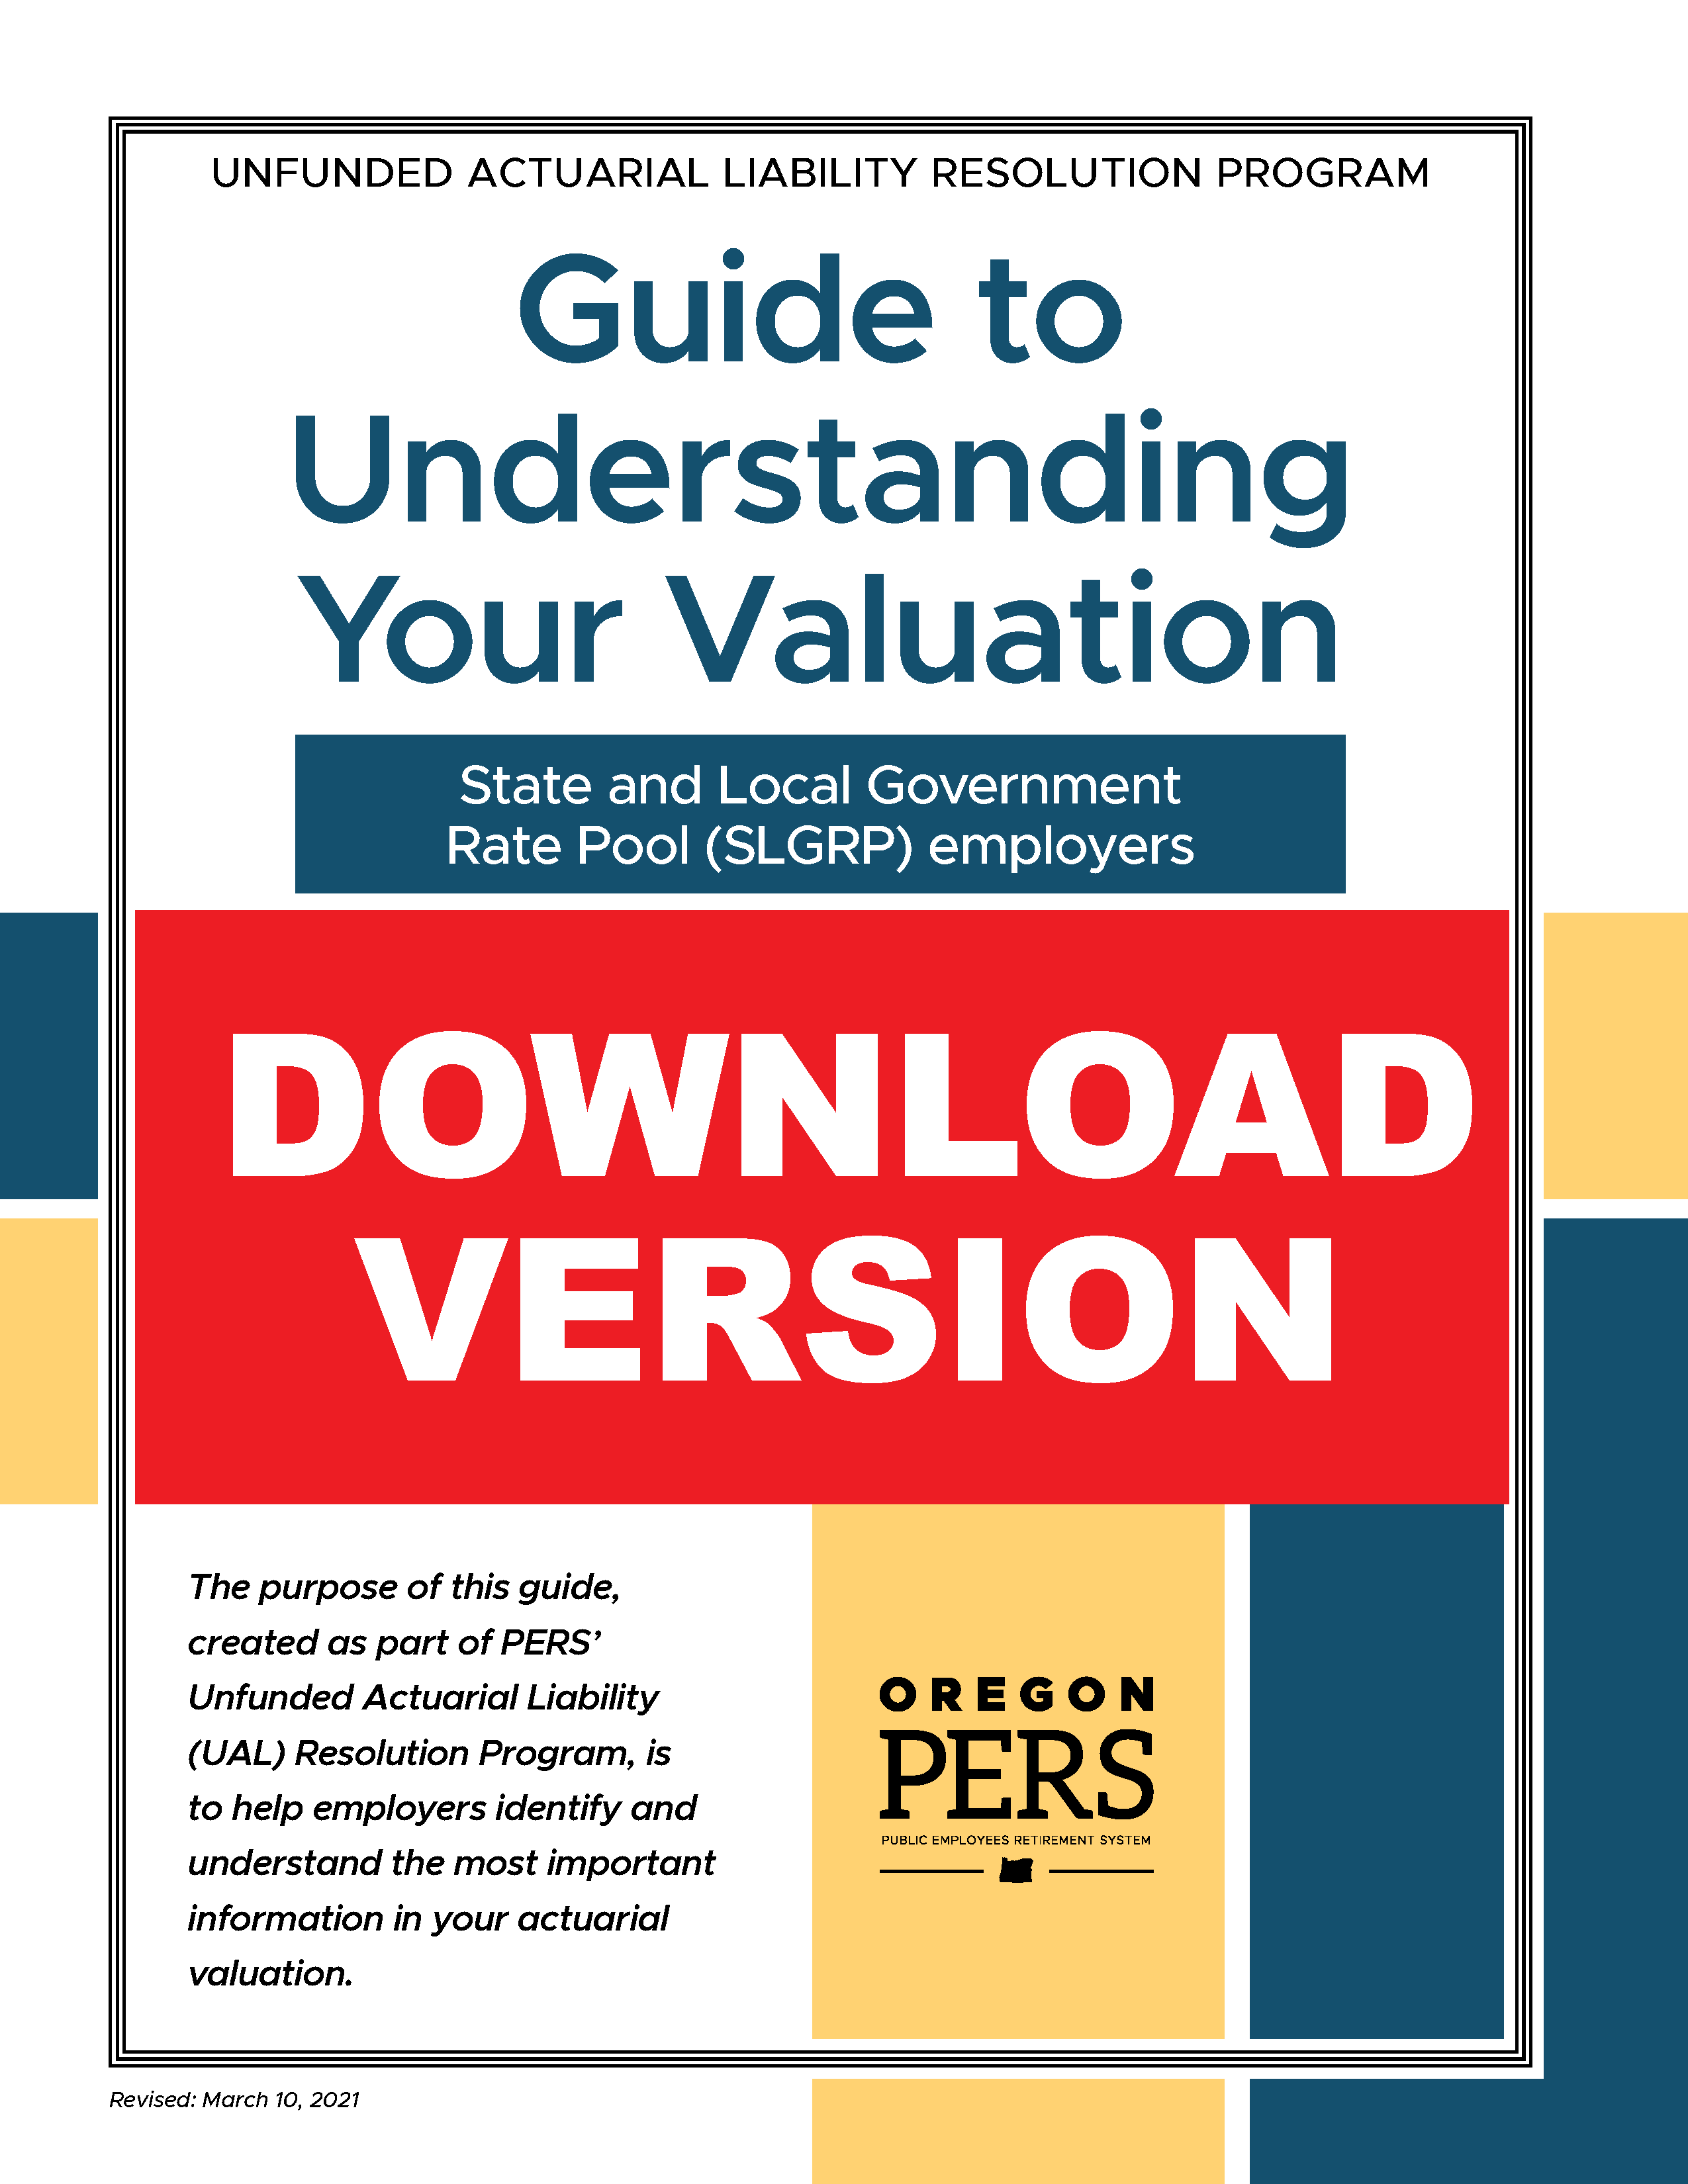 Cover image for PDF document Guide to Understanding Your Valuation - SLGRP download version